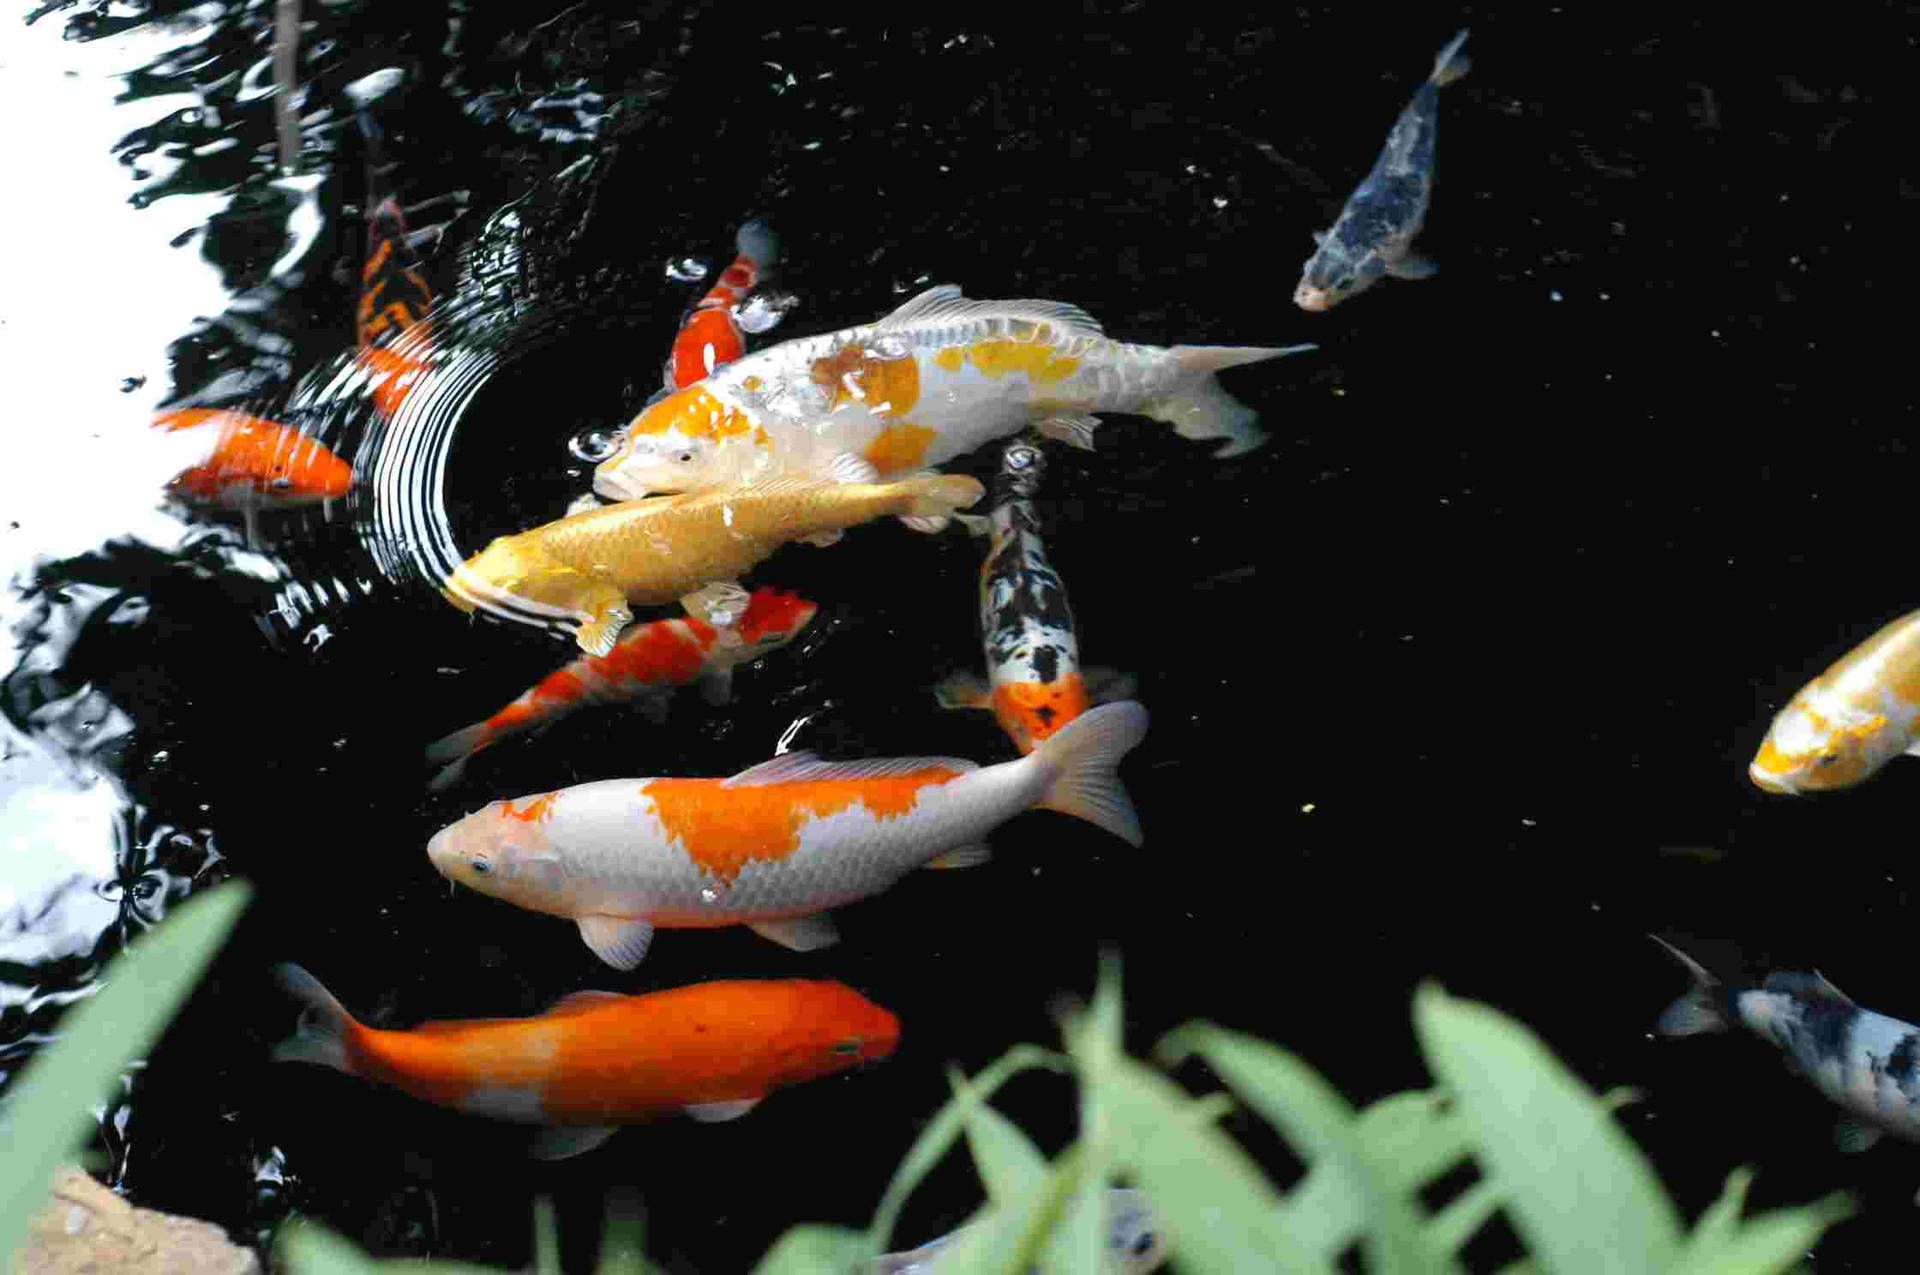 A group of koi fish swimming in a pond - Koi fish